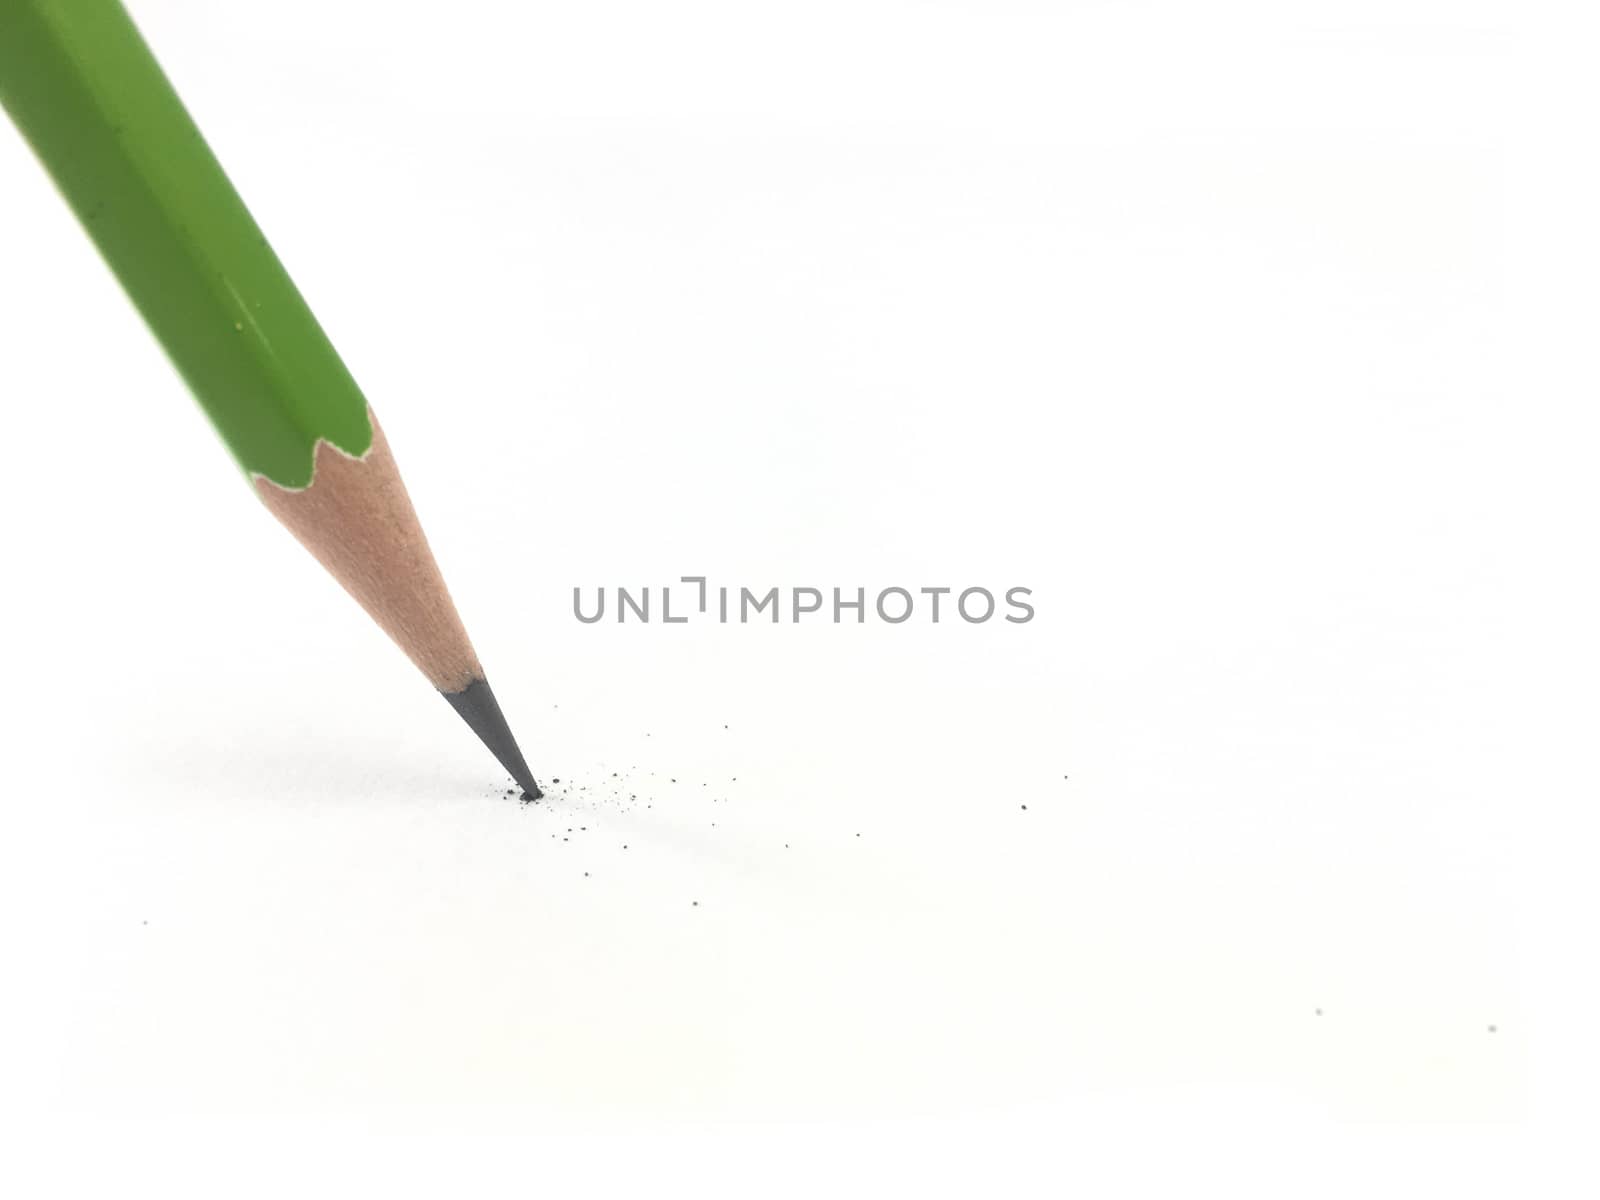 Started green pencil writing on paper.